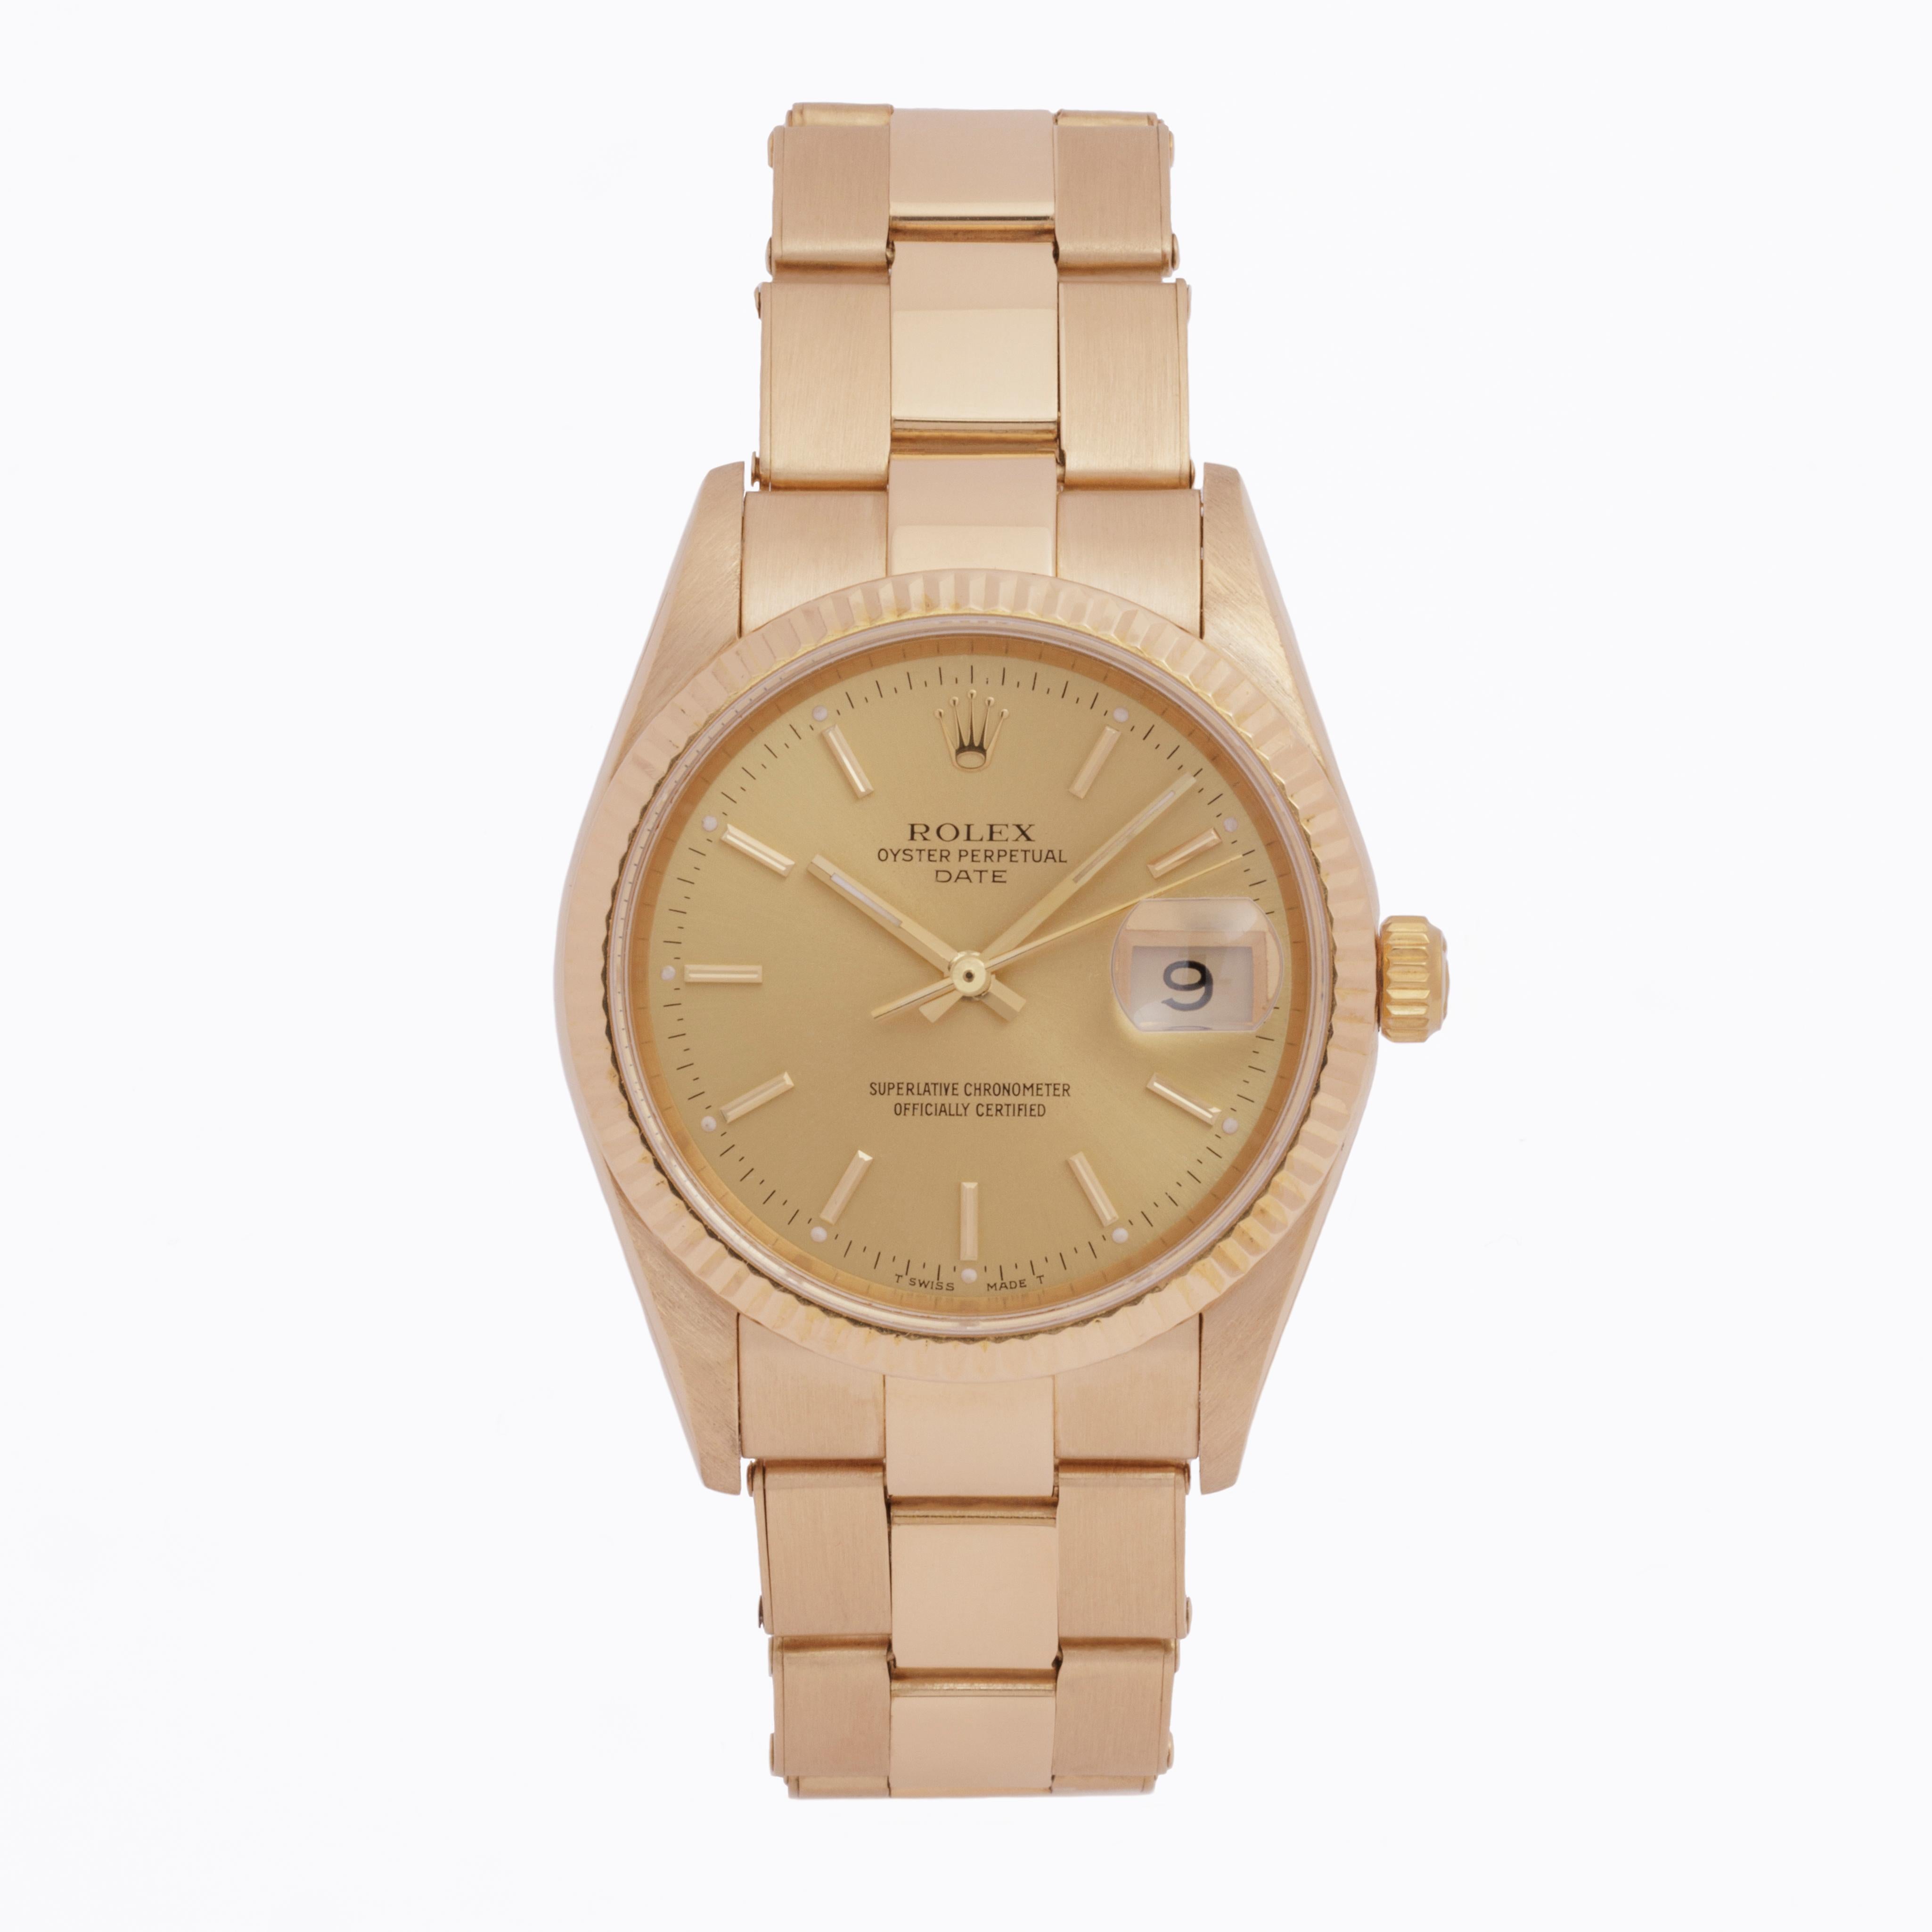 1990 Rolex Date 18 Karat Yellow Gold 
Model 15238
34mm Dial
Made in Switzerland
c.1990

Stephanie Windsor guarantees the proper functioning of this watch mechanism for ONE year from the purchase date. Our watches are guaranteed to be of the period,